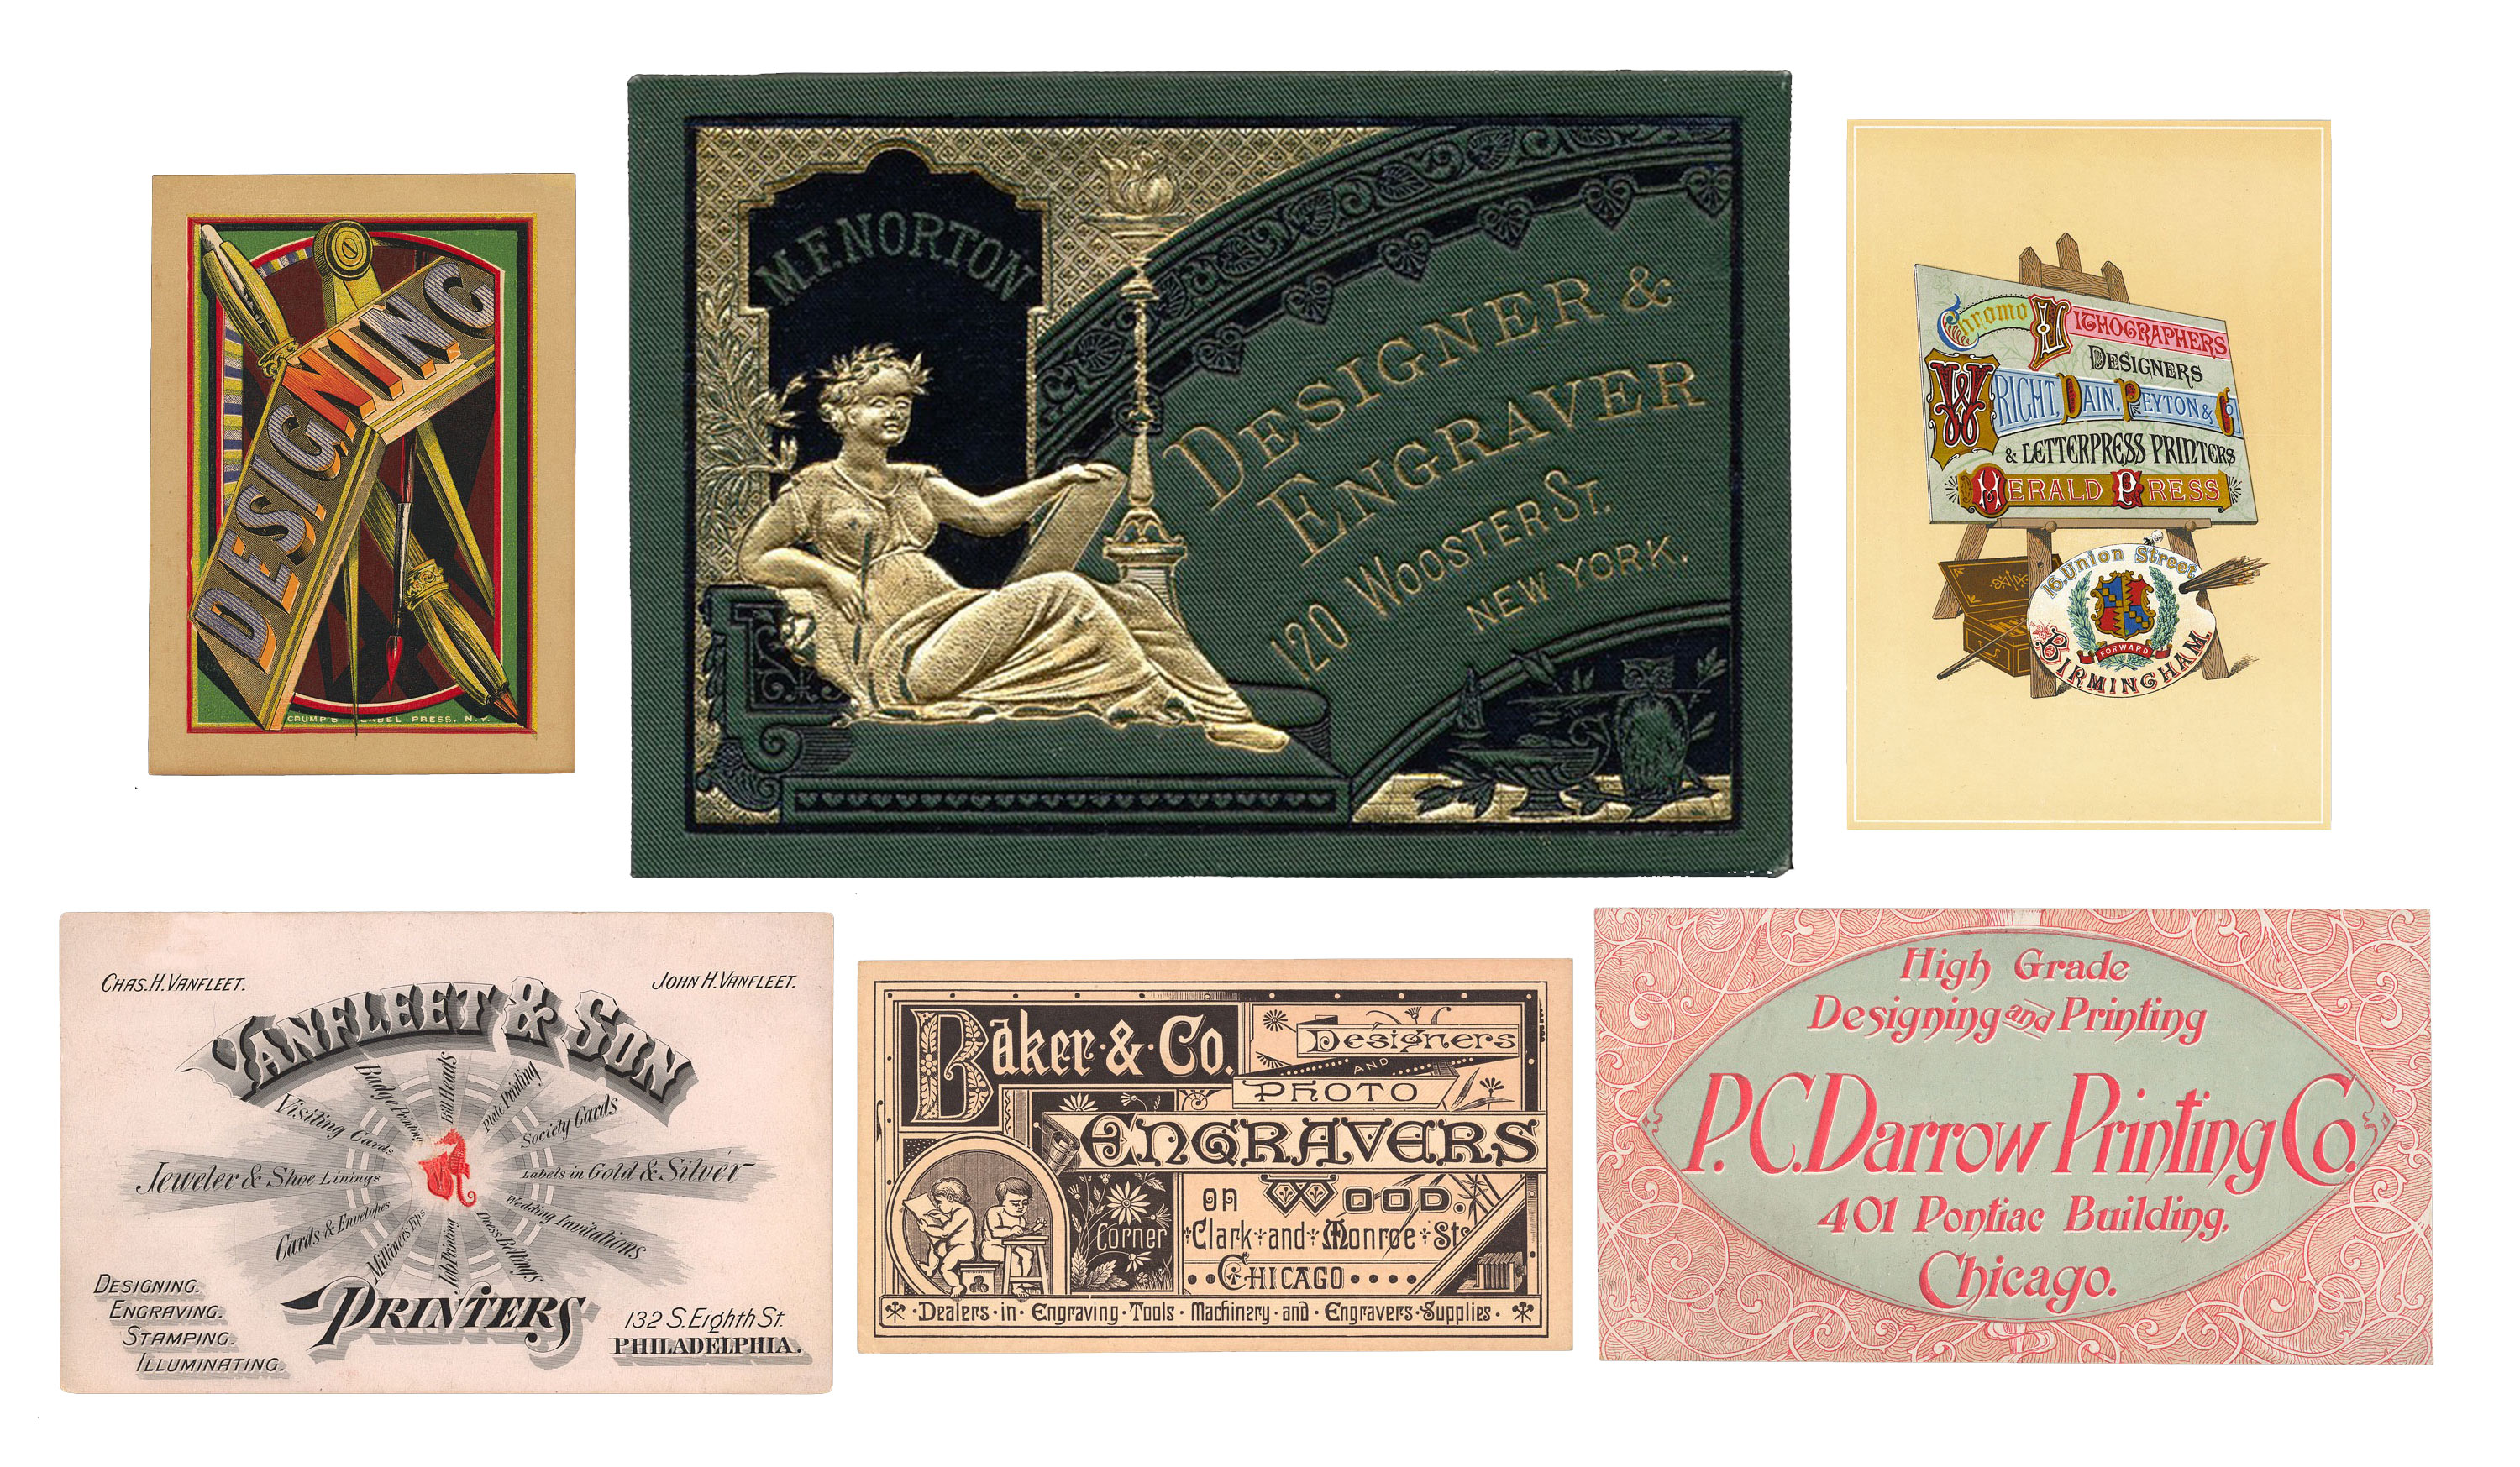 Coming Soon: The Richard Sheaff Ephemera Collection - Letterform Archive